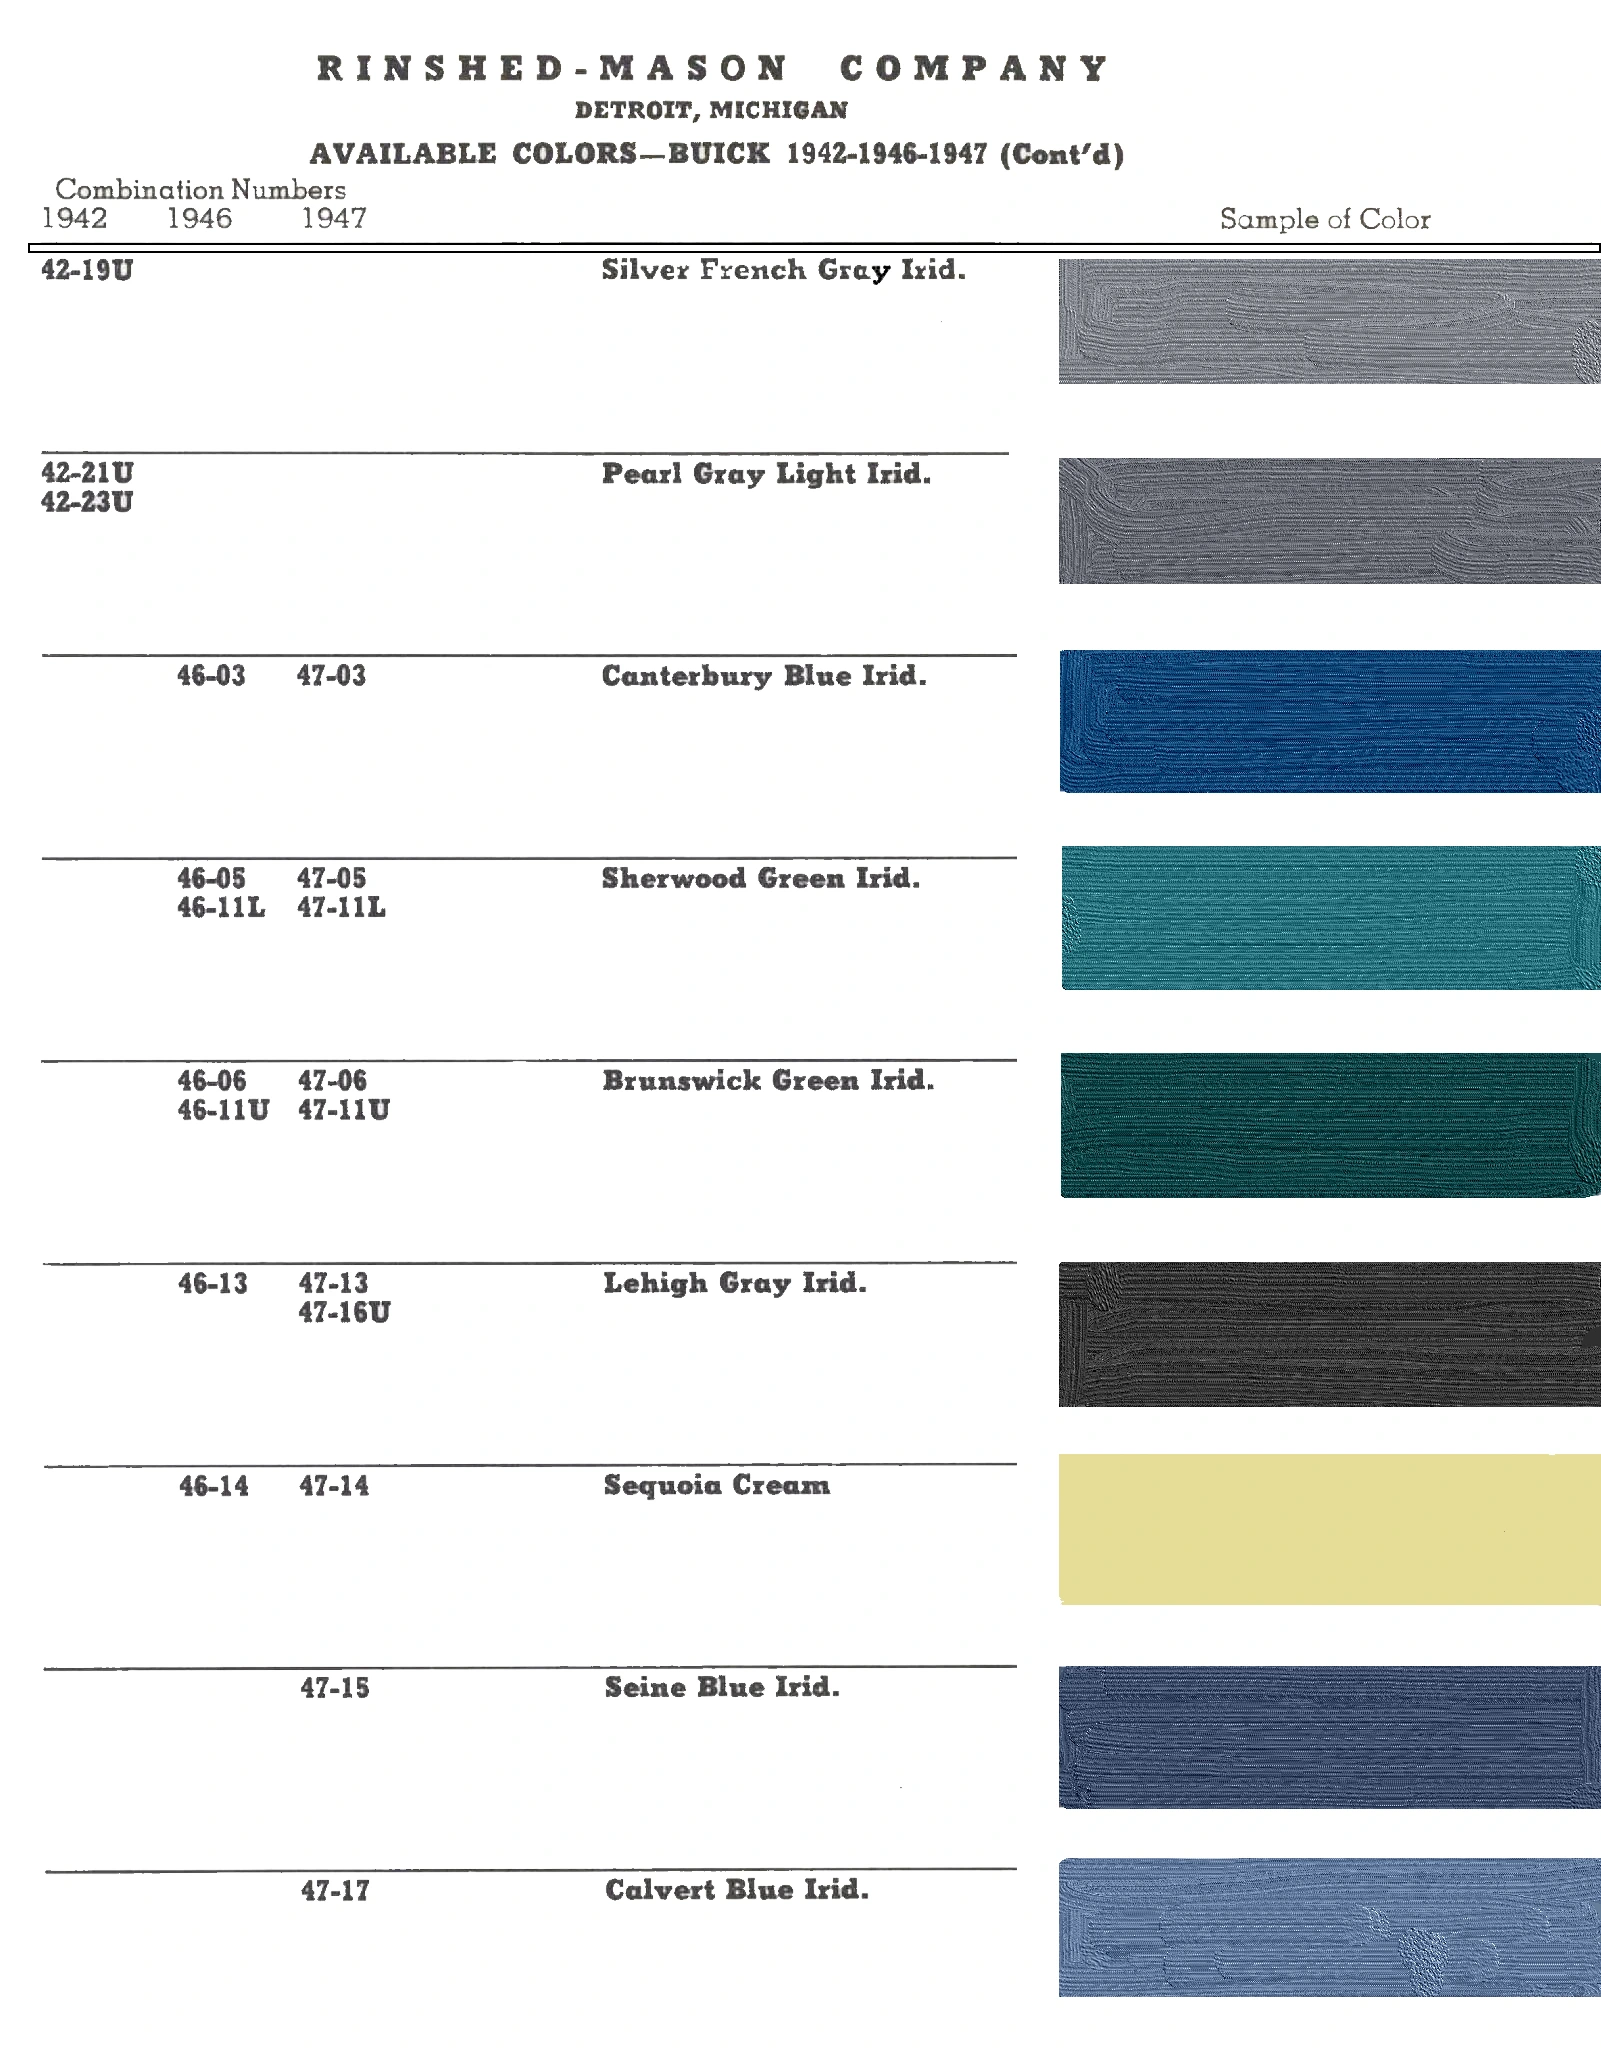 Combined Color Charts by Mfg's during ww2, Buick model Paint colors